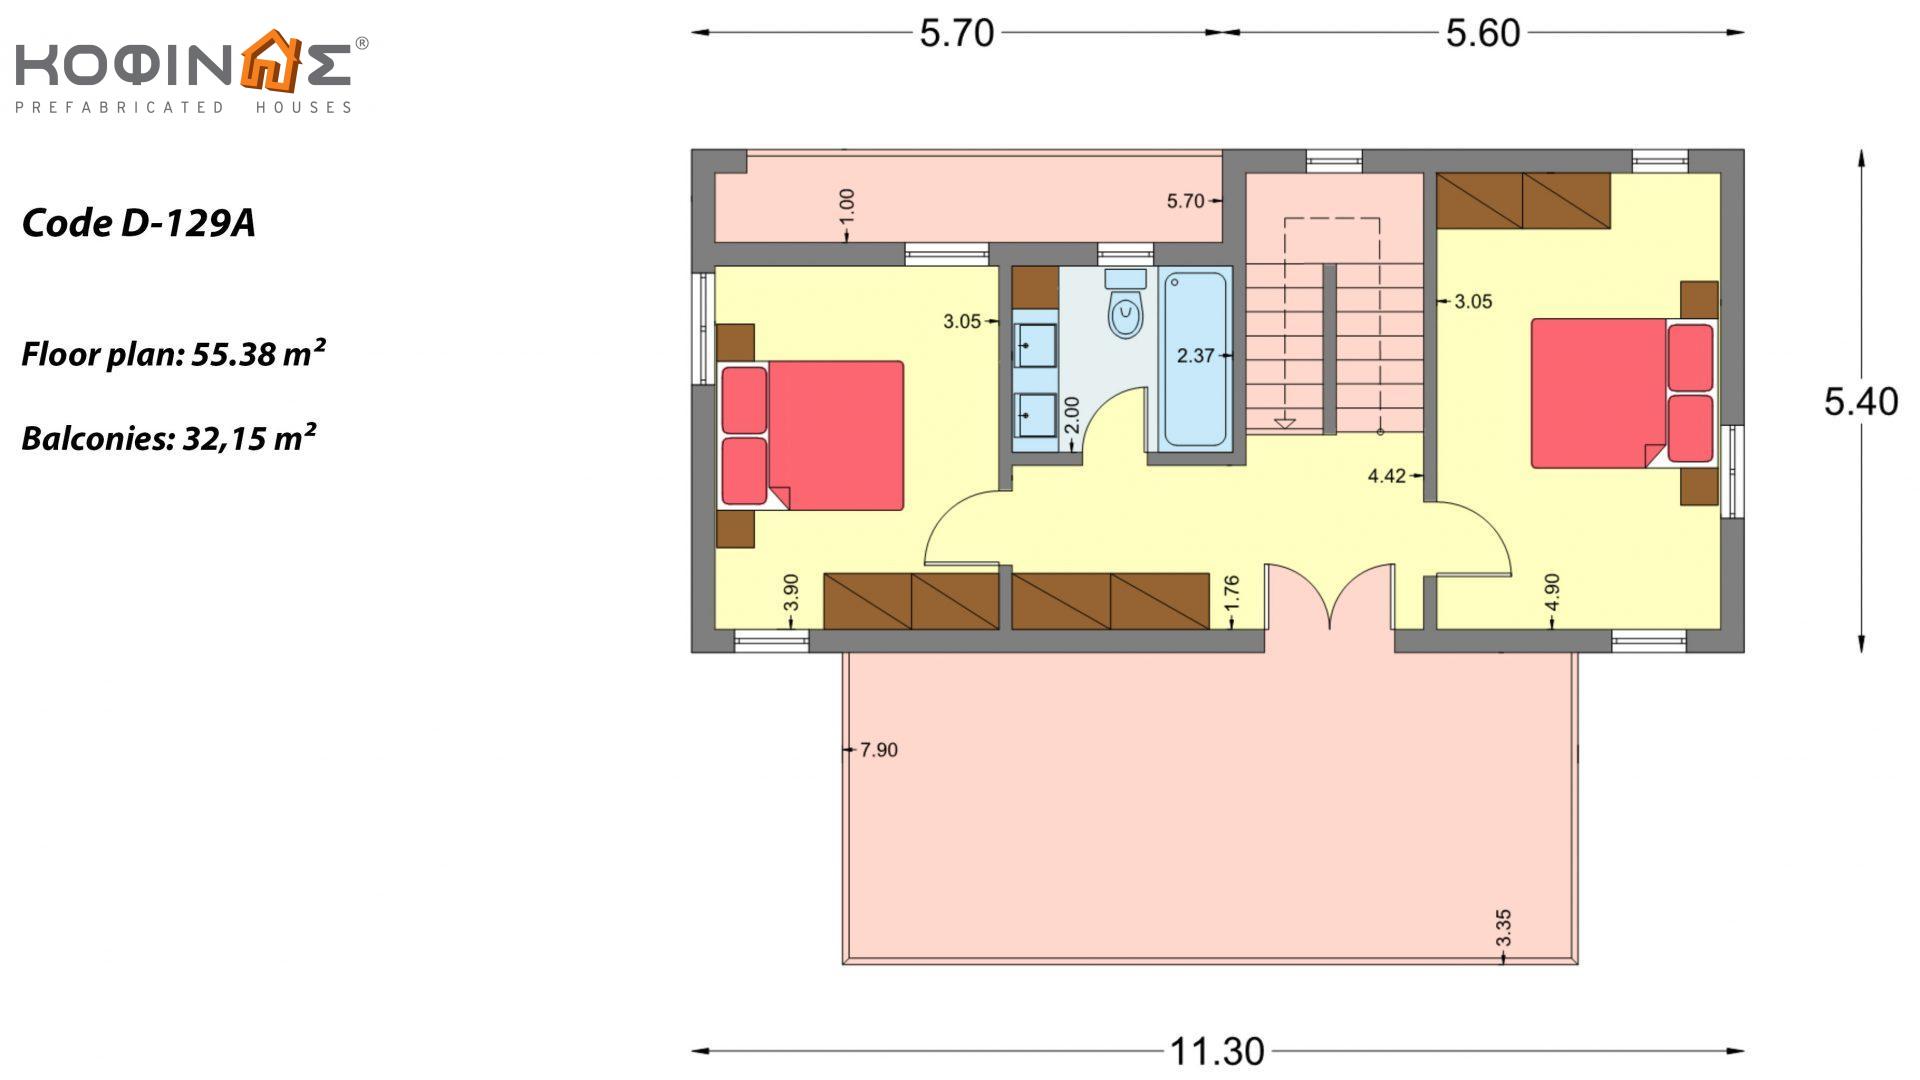 2-story house D-129A, total surface of 129,45 m²,roofed areas 13.39 m²,balconies 32.15 m²